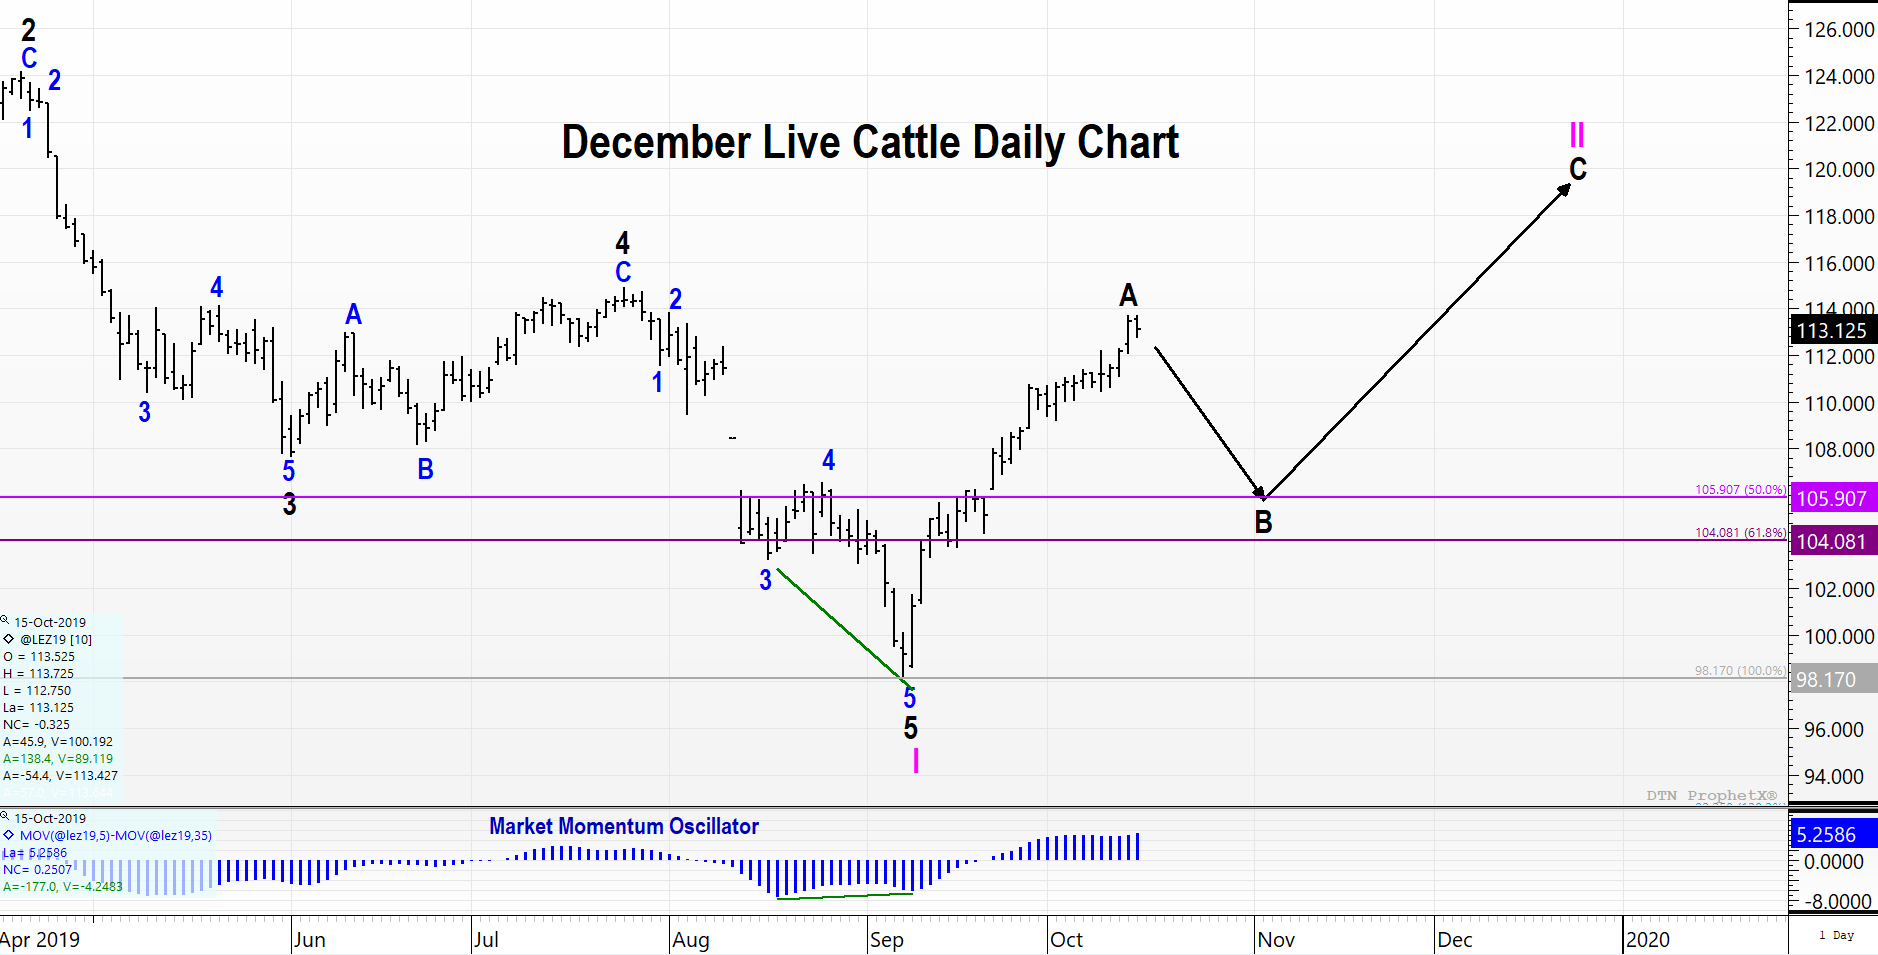 Elliott Wave Count in Live Cattle Futures